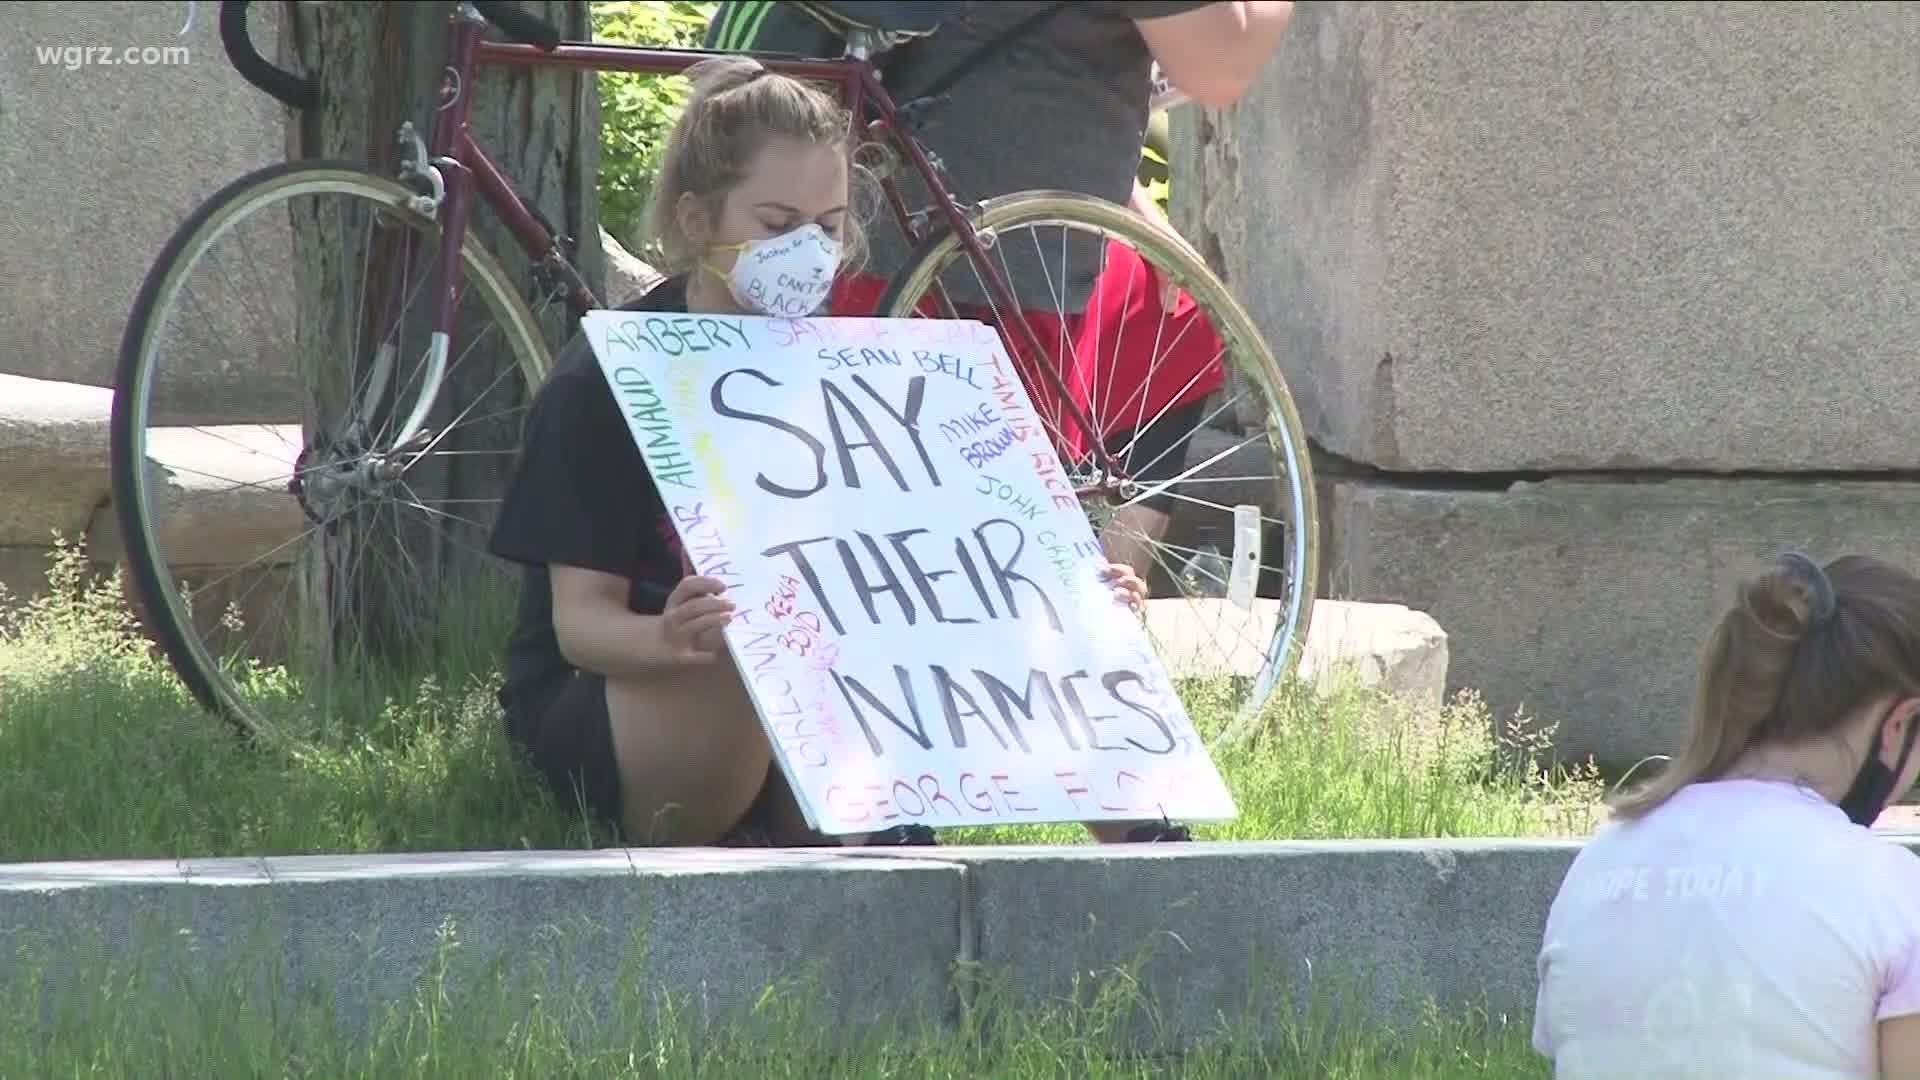 Citizens Speak Out On Recent Police Action